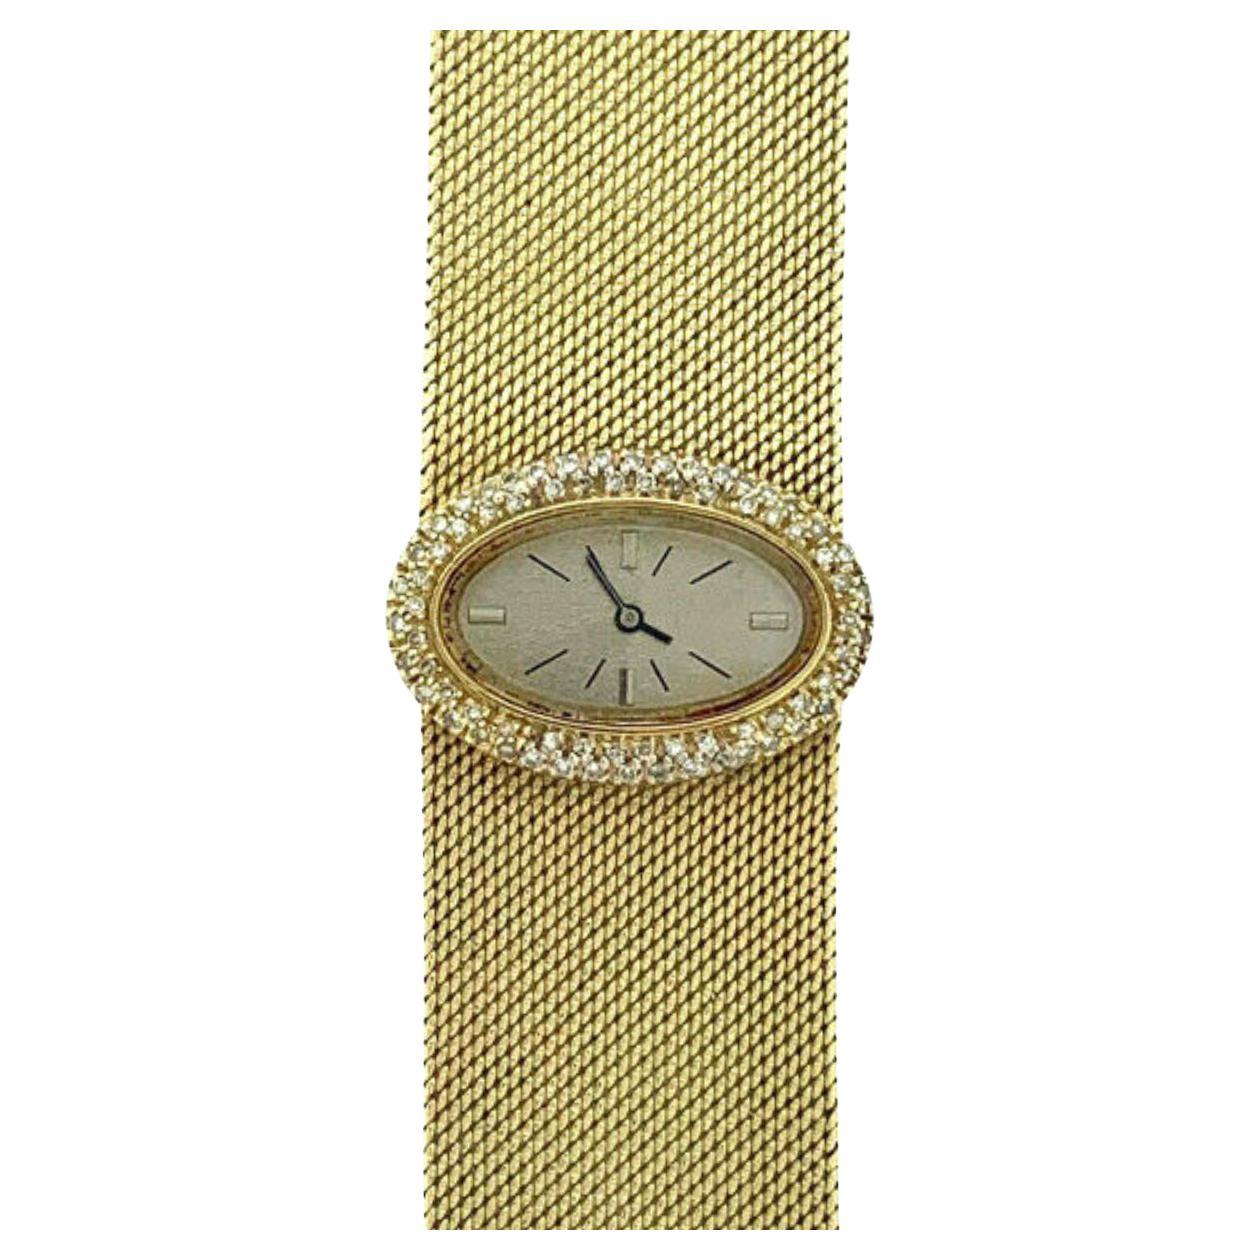 14k Yellow Gold and Diamond Oval Shaped Vintage Ladies Watch